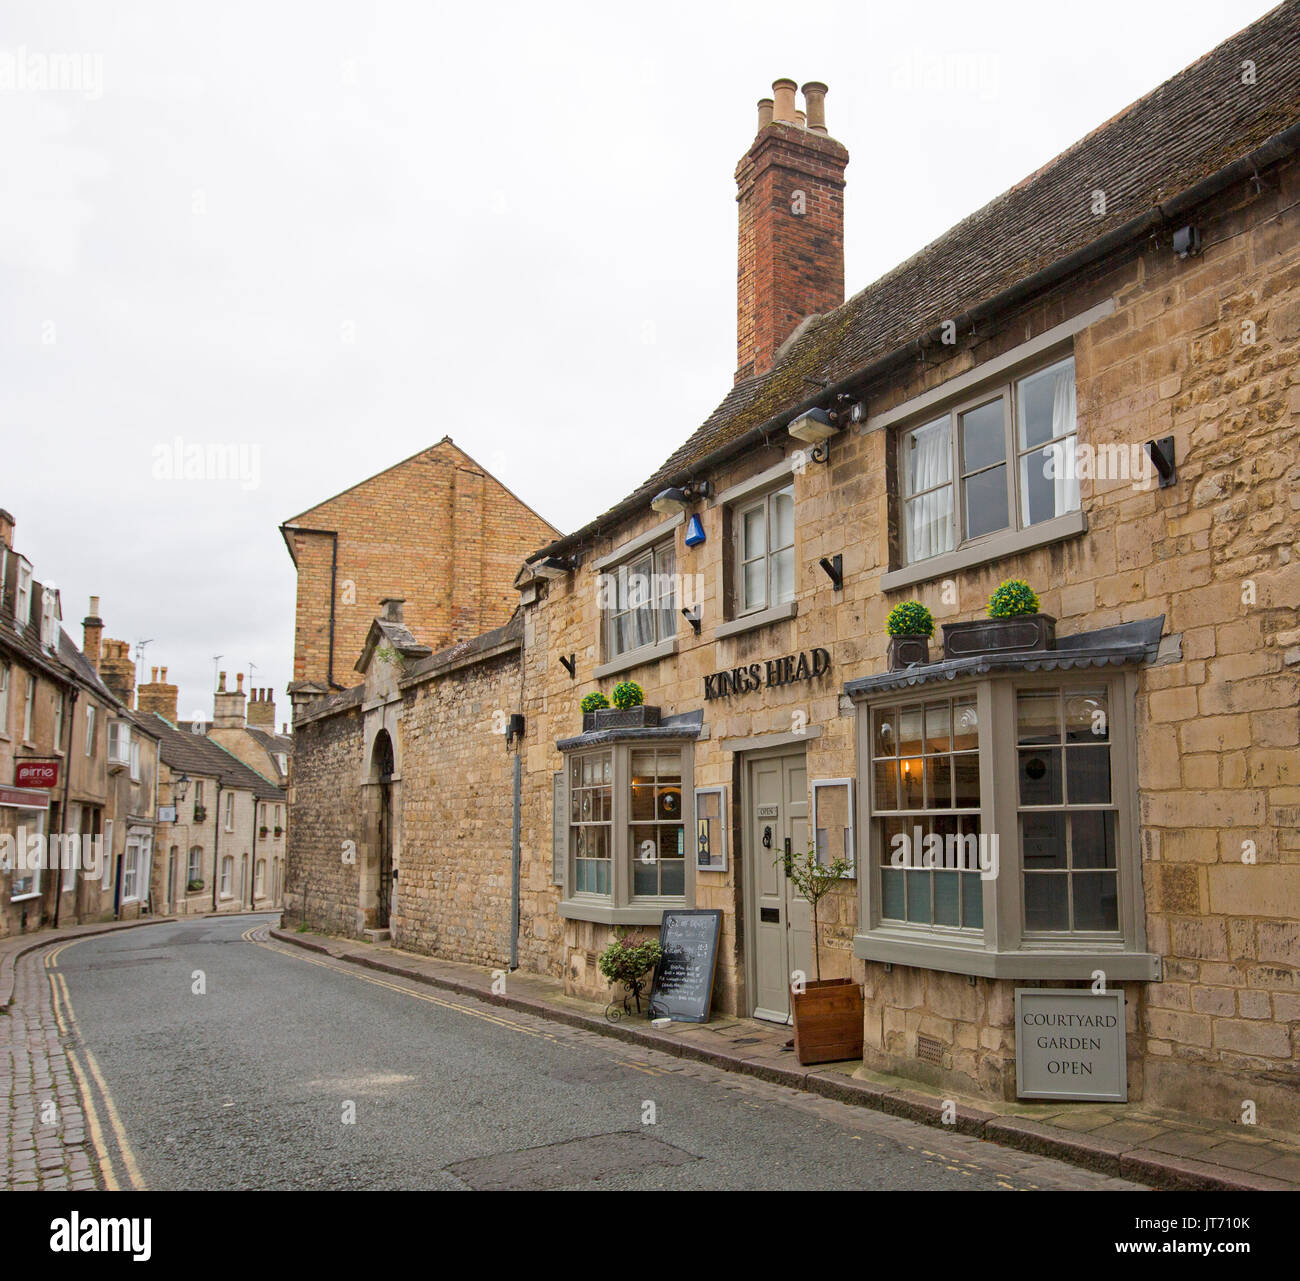 Kings Head hotel in Stamford, Lincolnshire, England Stock Photo